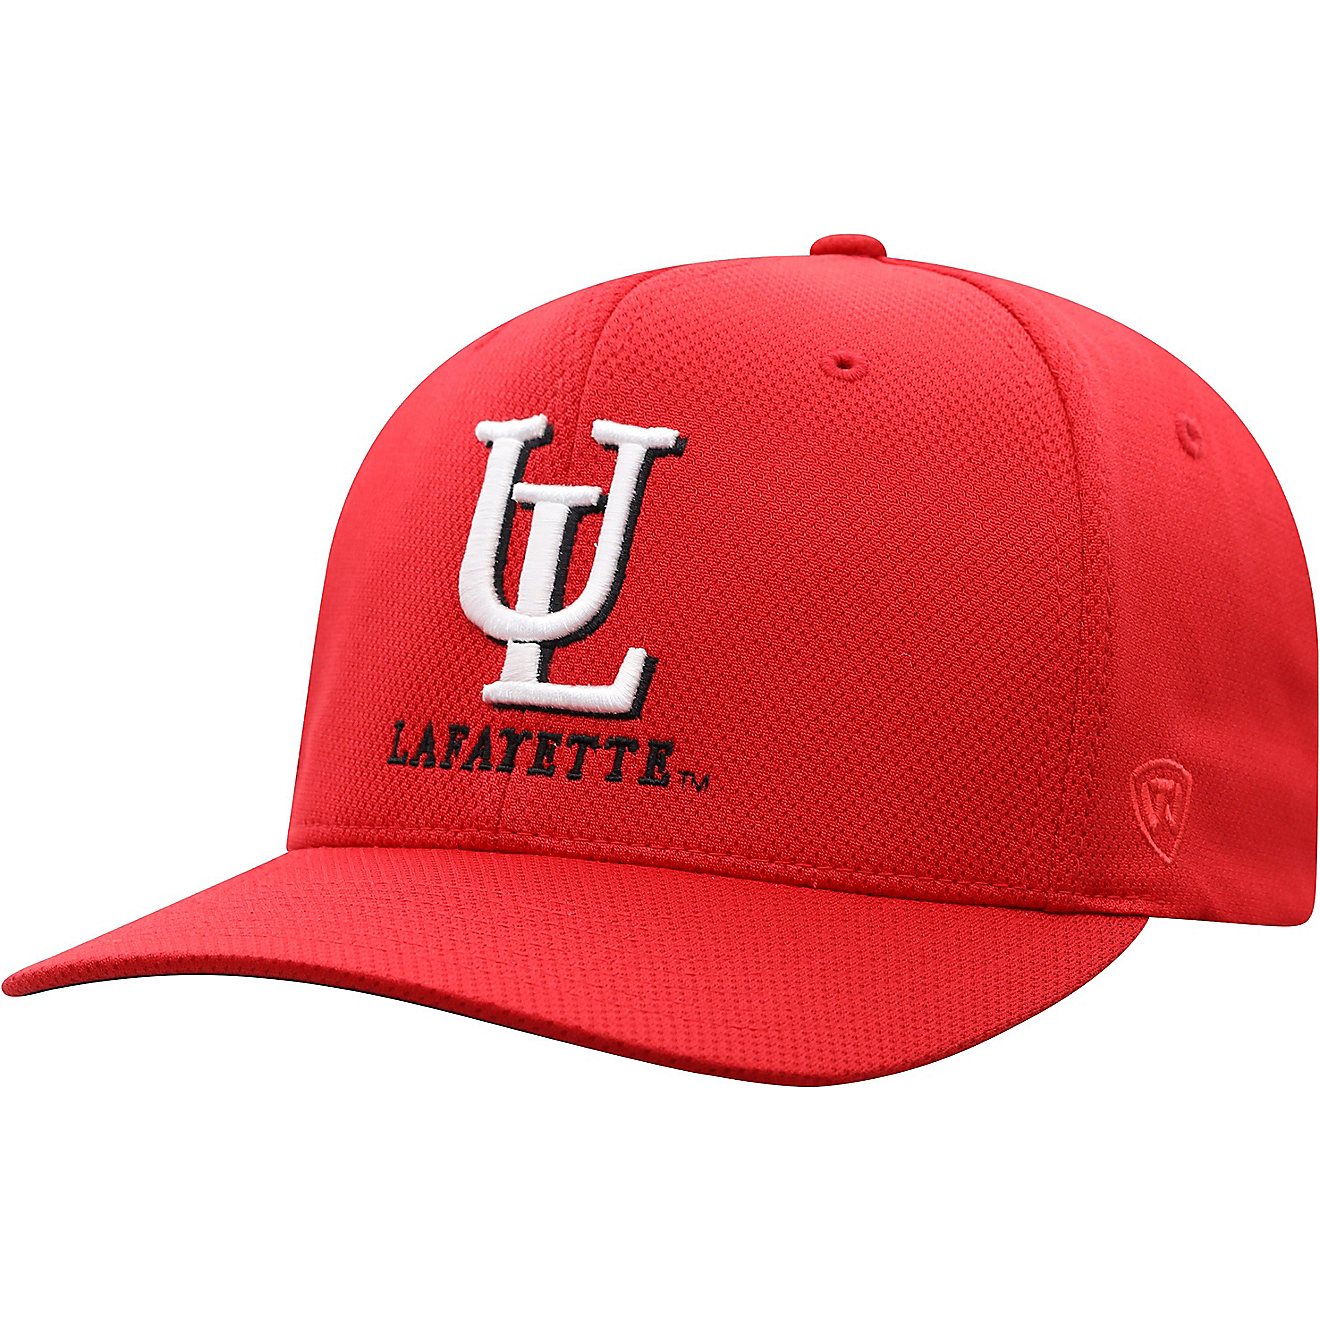 Top of the World Men’s University of Louisiana at Lafayette Reflex Cap                                                         - view number 1